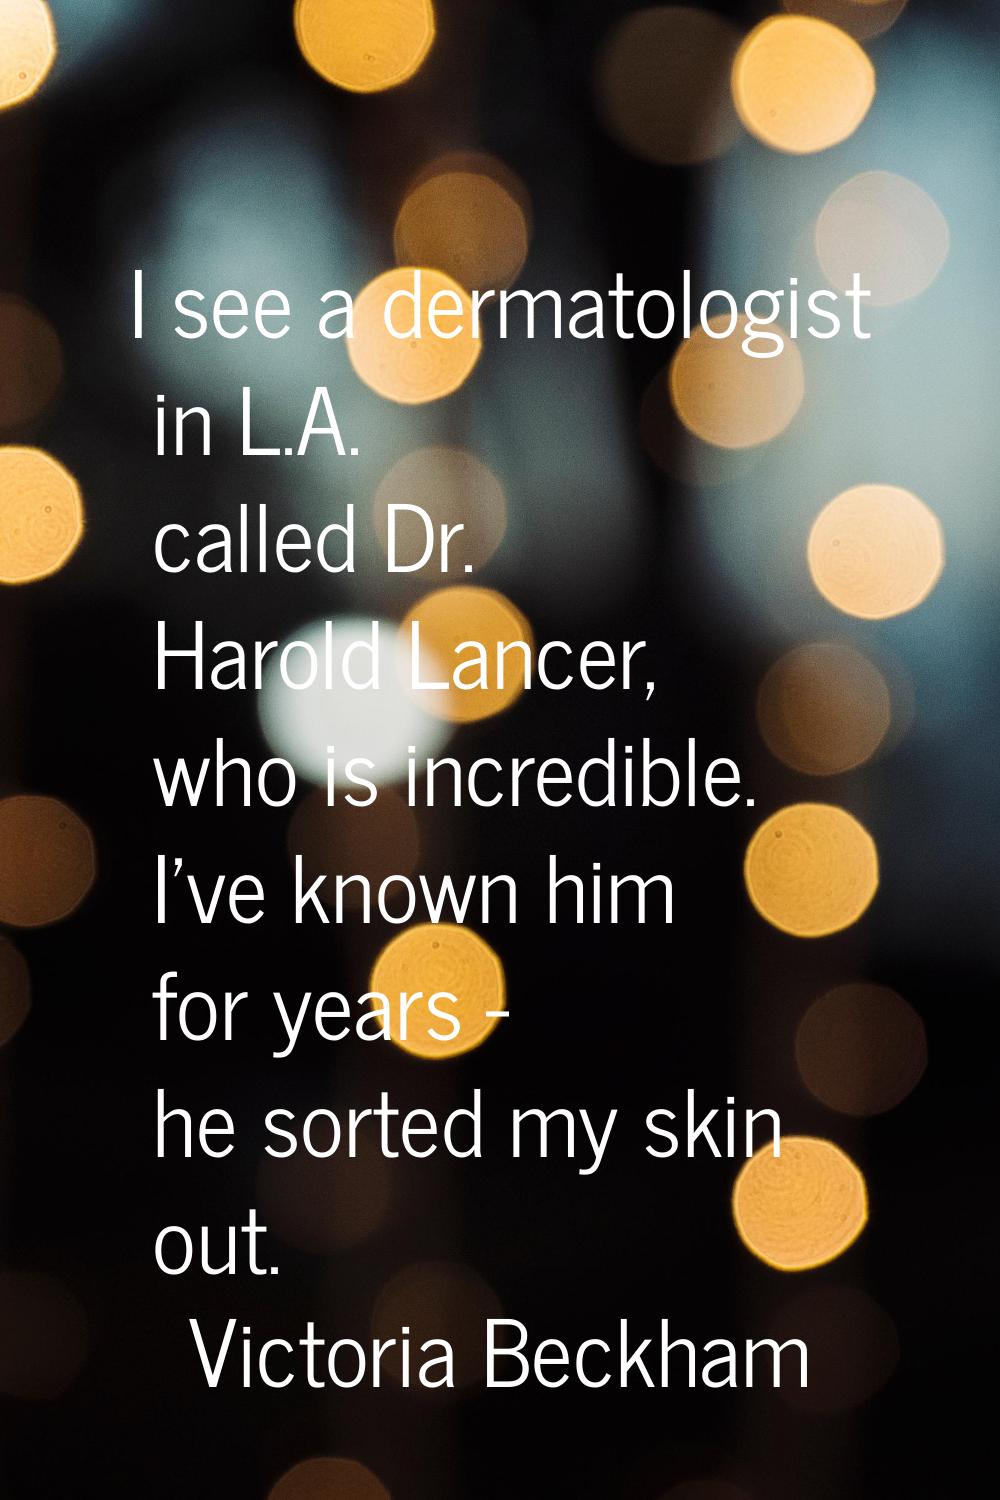 I see a dermatologist in L.A. called Dr. Harold Lancer, who is incredible. I've known him for years